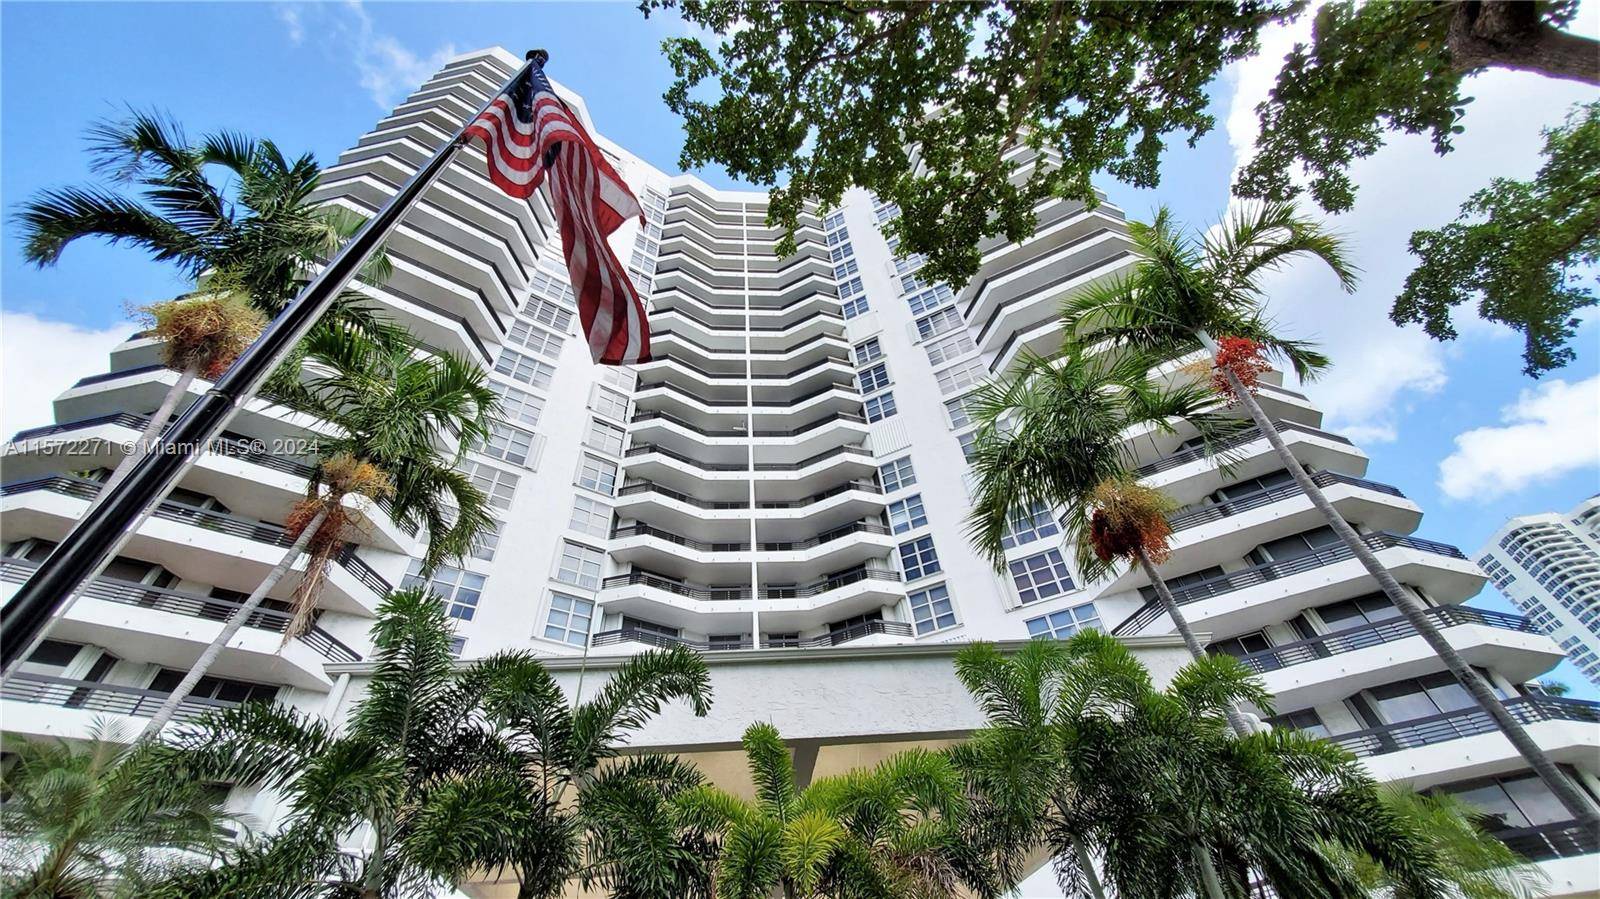 Indulge in stunning views of the Ocean and Golf course from this magnificent penthouse corner condo.